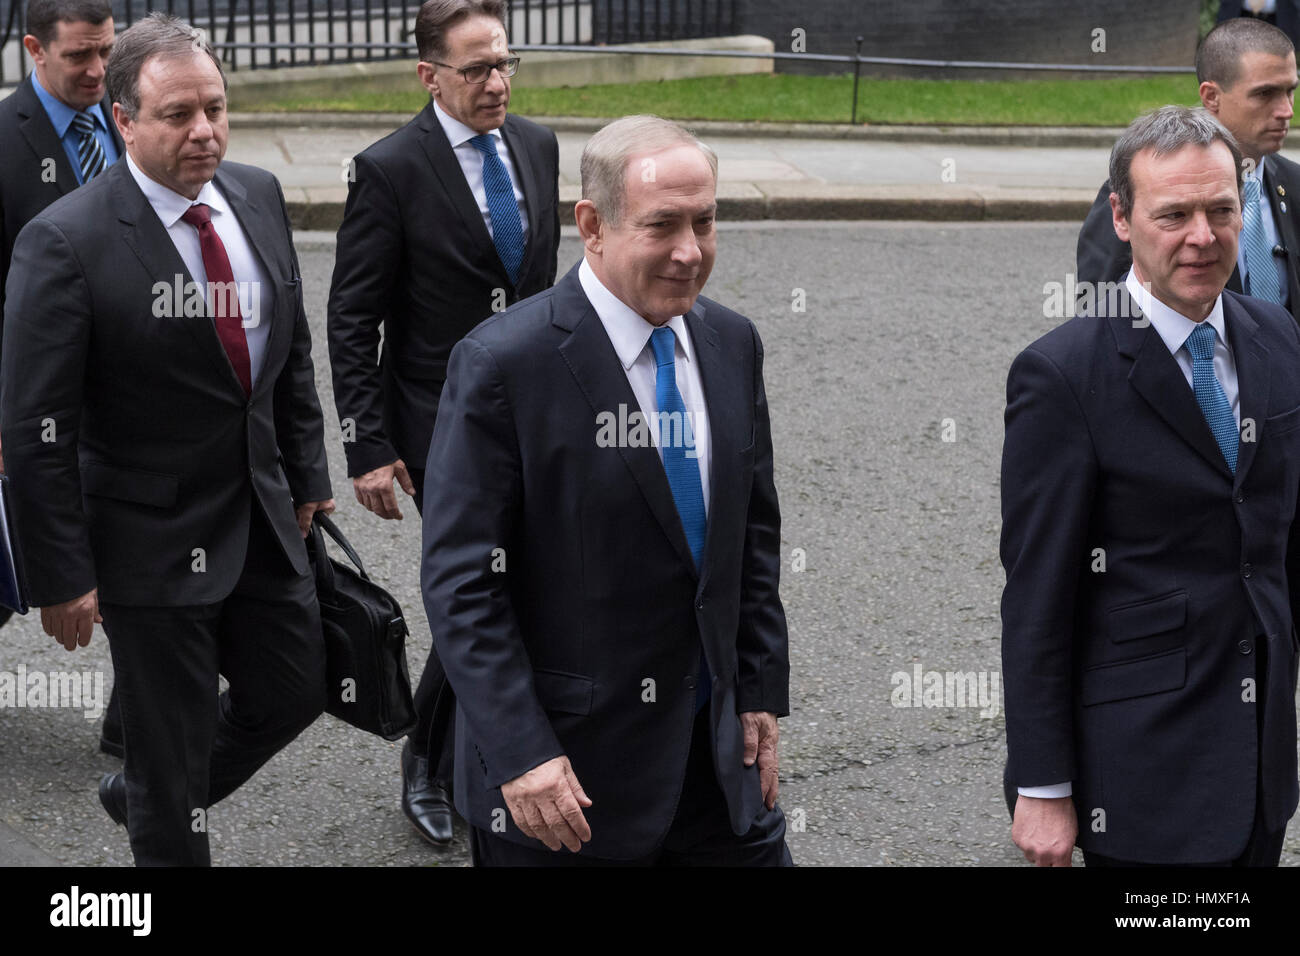 London, Britain. 6th February, 2017. Benjamin Netanyahu Prime Minister of Israel, leaving 10 Downing Street, after a meeting with Theresa May, the British Prime Minister. London, Britain. Credit: Alex MacNaughton/Alamy Live News Stock Photo